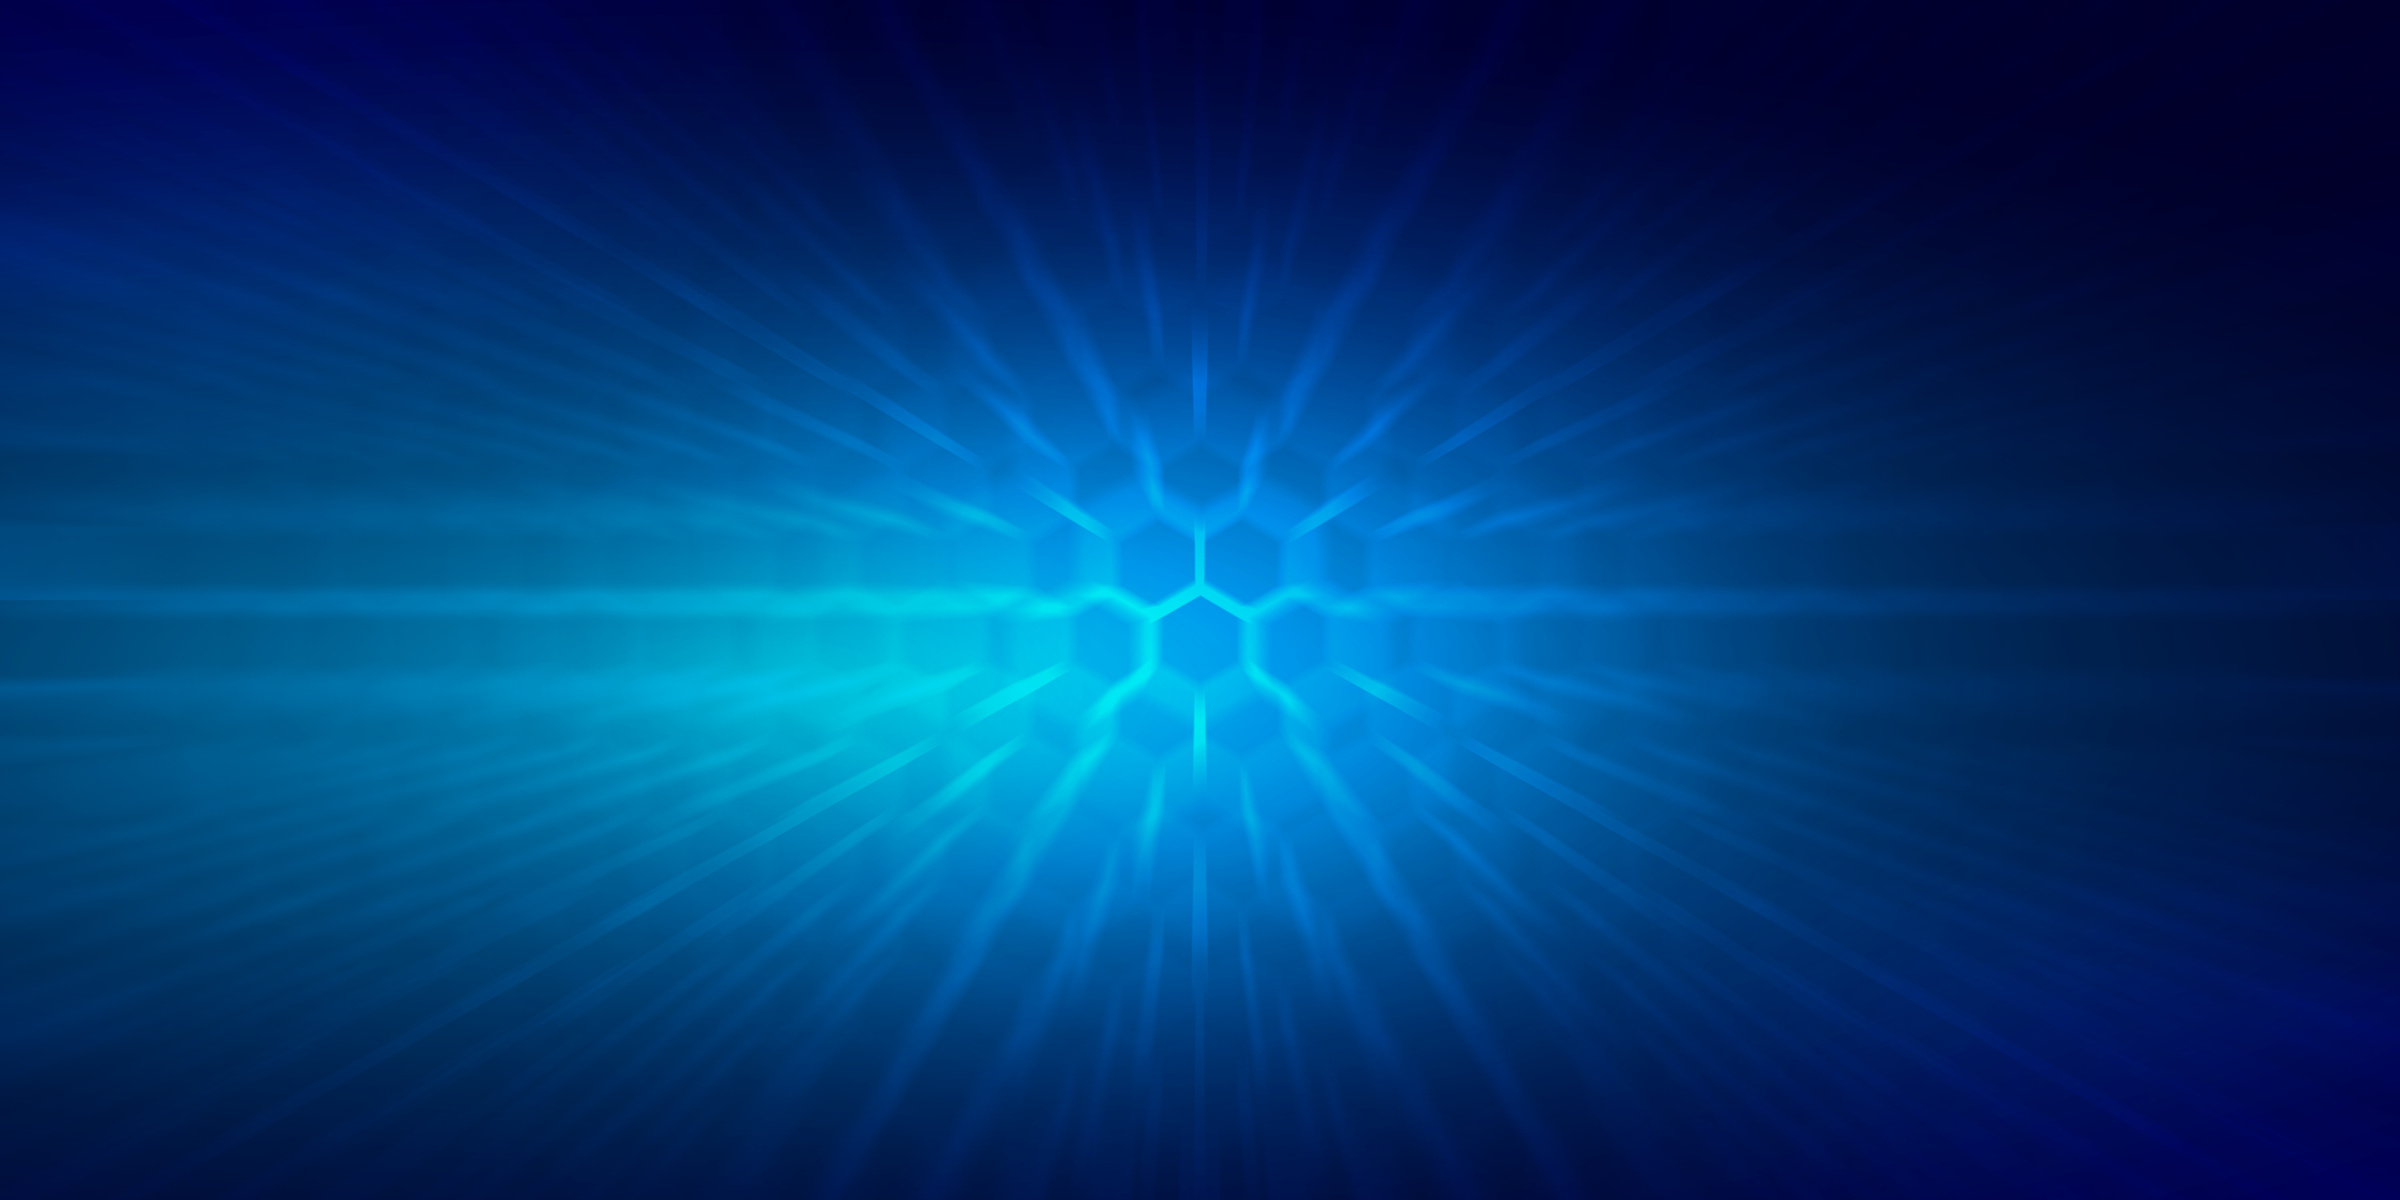 Abstract blurry blue rectangles background wallaper illustrated